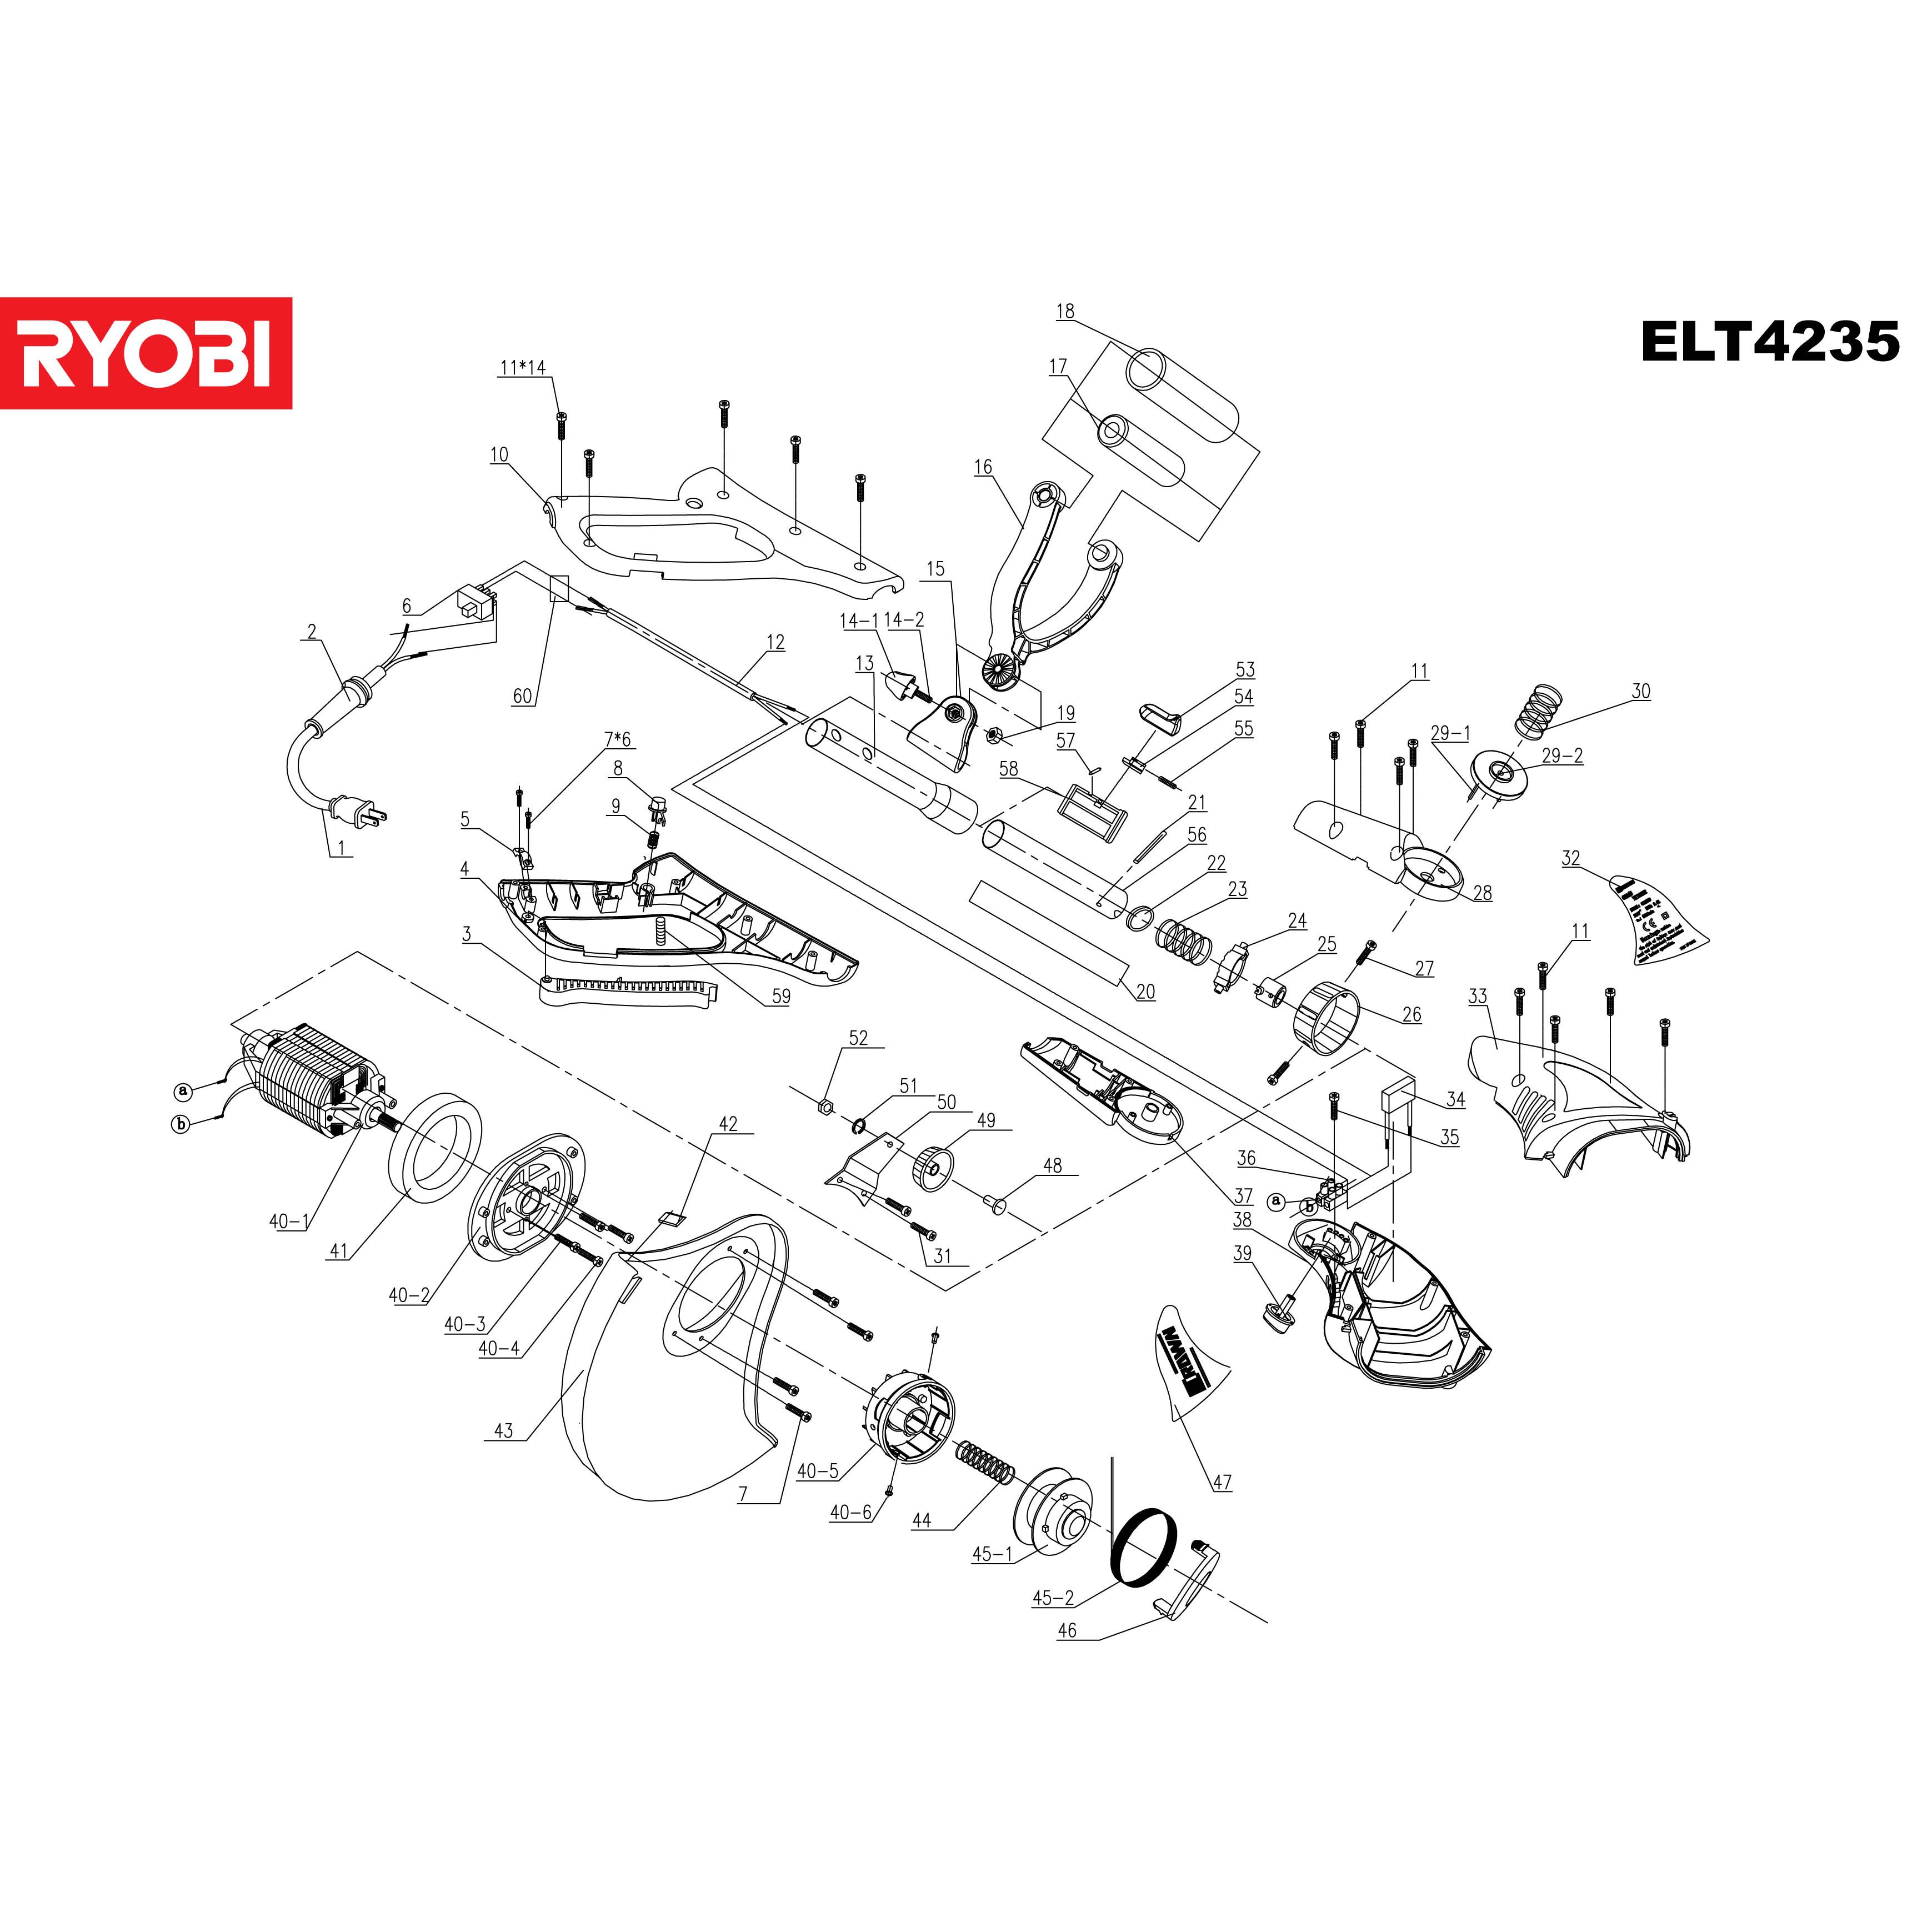 Buy A Ryobi Elt4235 Spare Part And Fix Your 420w Line Trimmer Today